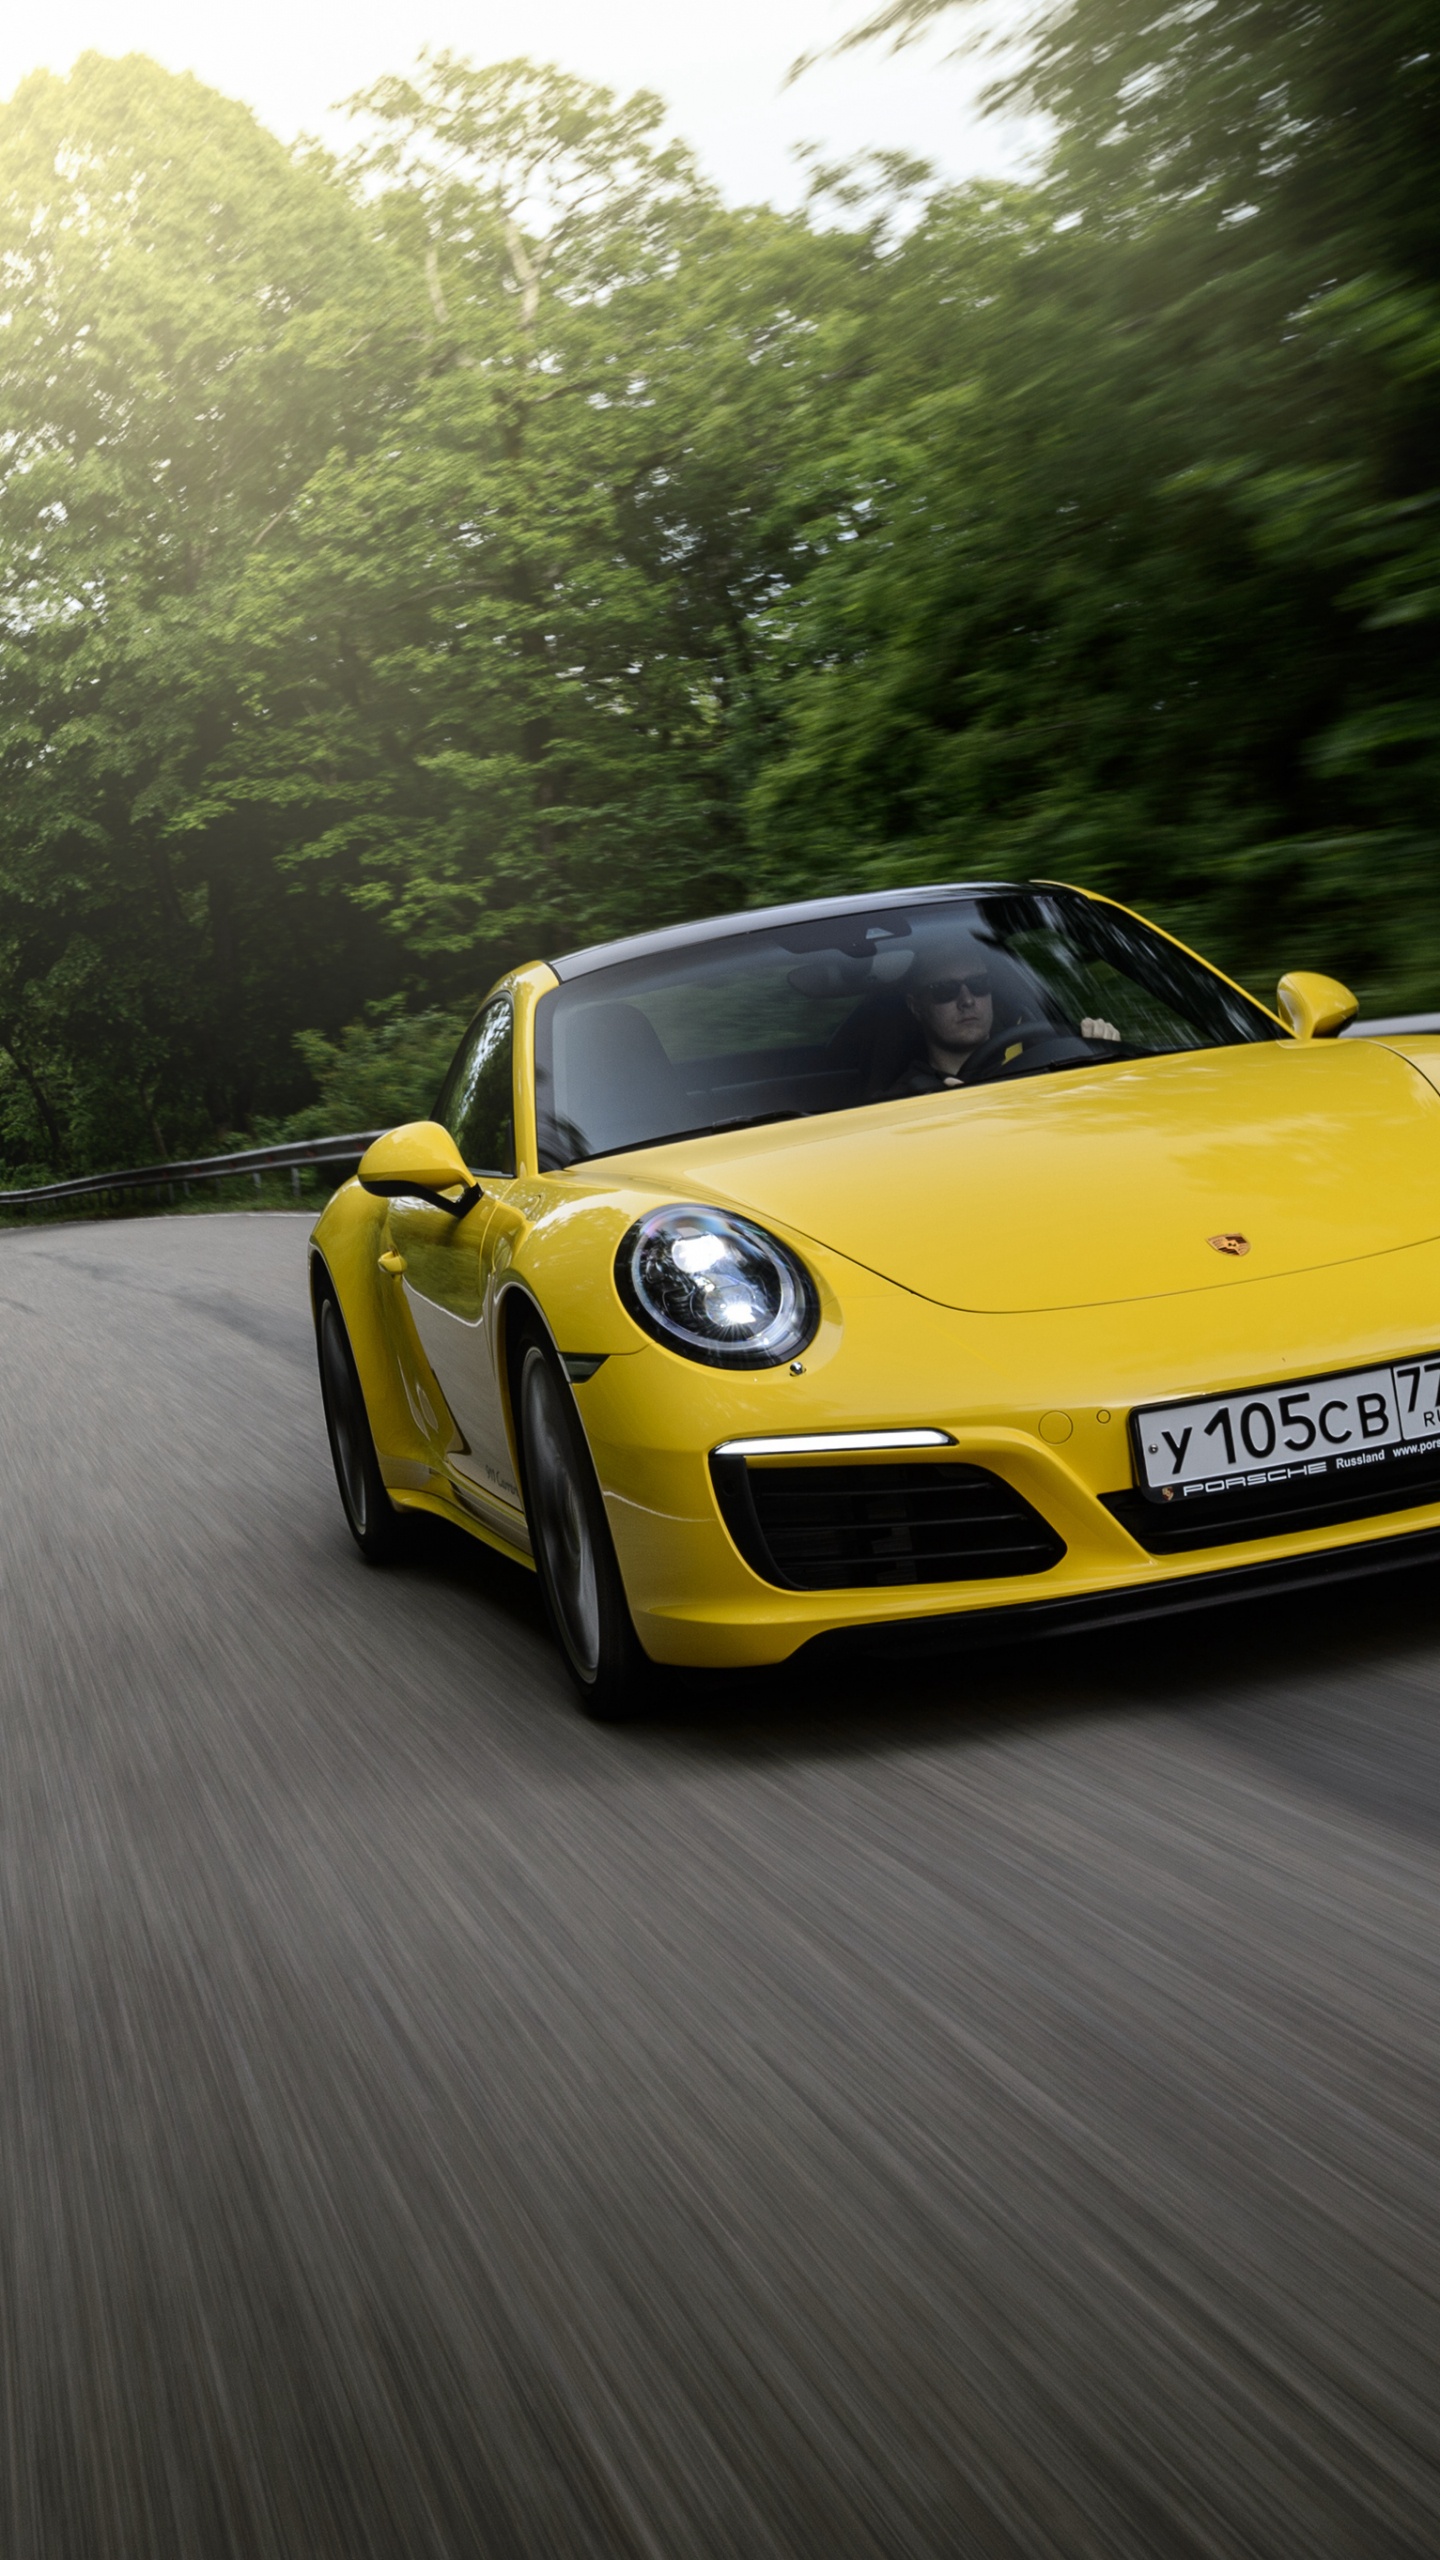 Yellow Porsche 911 on Road During Daytime. Wallpaper in 1440x2560 Resolution